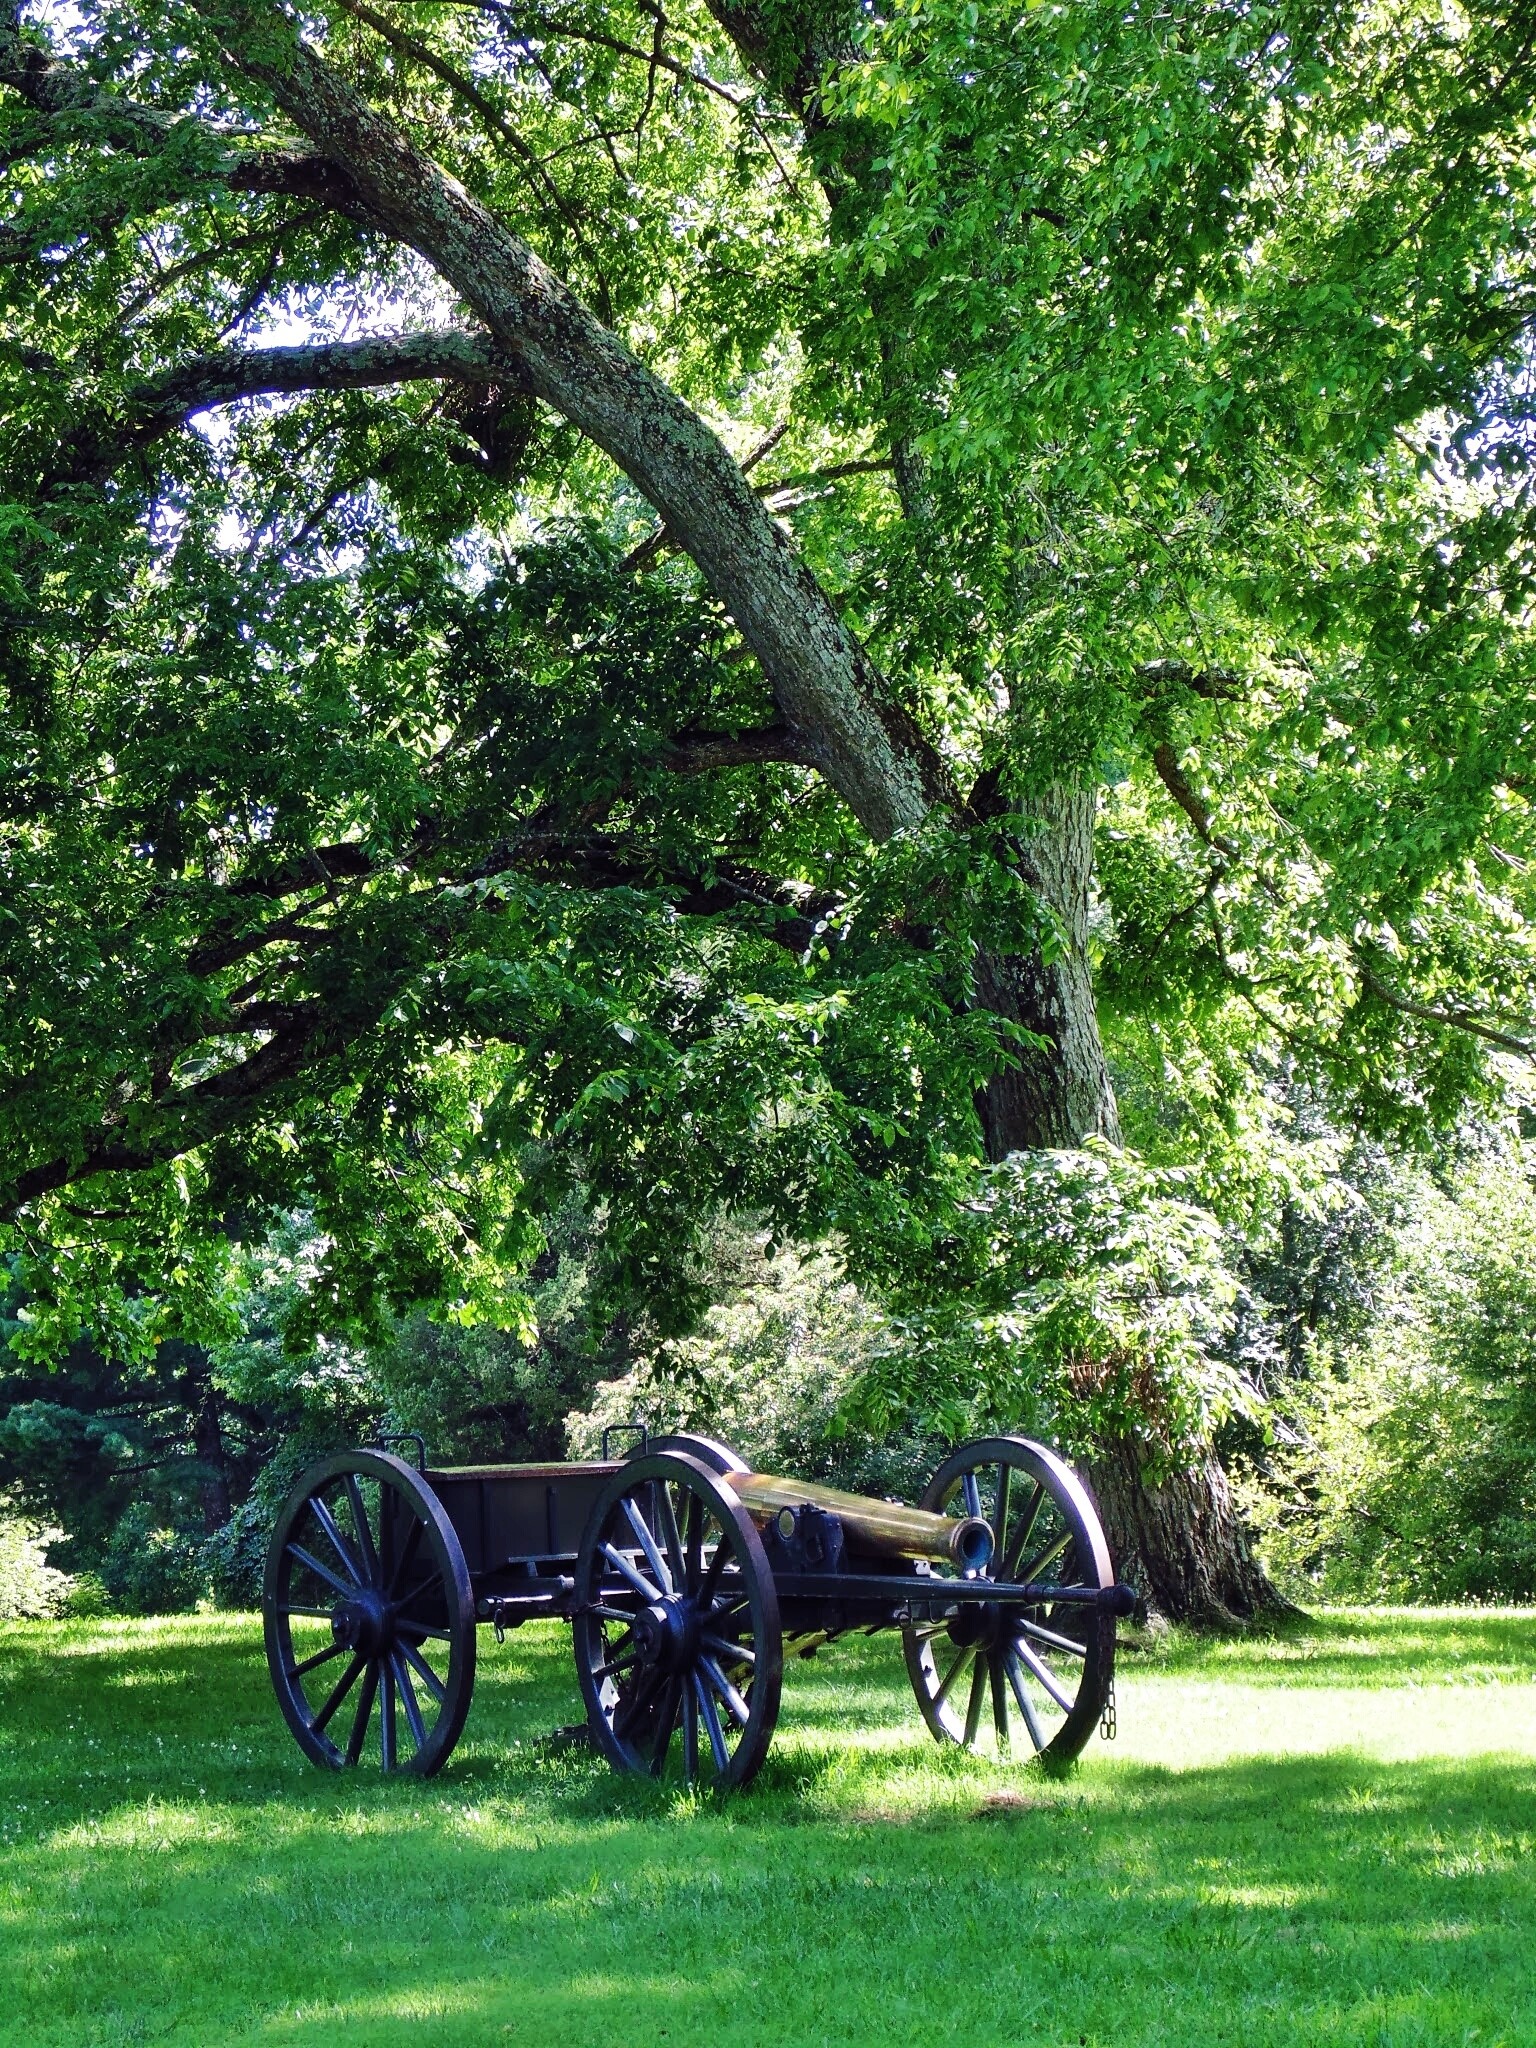 Cannon On Grass Field Against Tree In Petersburg National Battlefield, near Colonial Heights VA